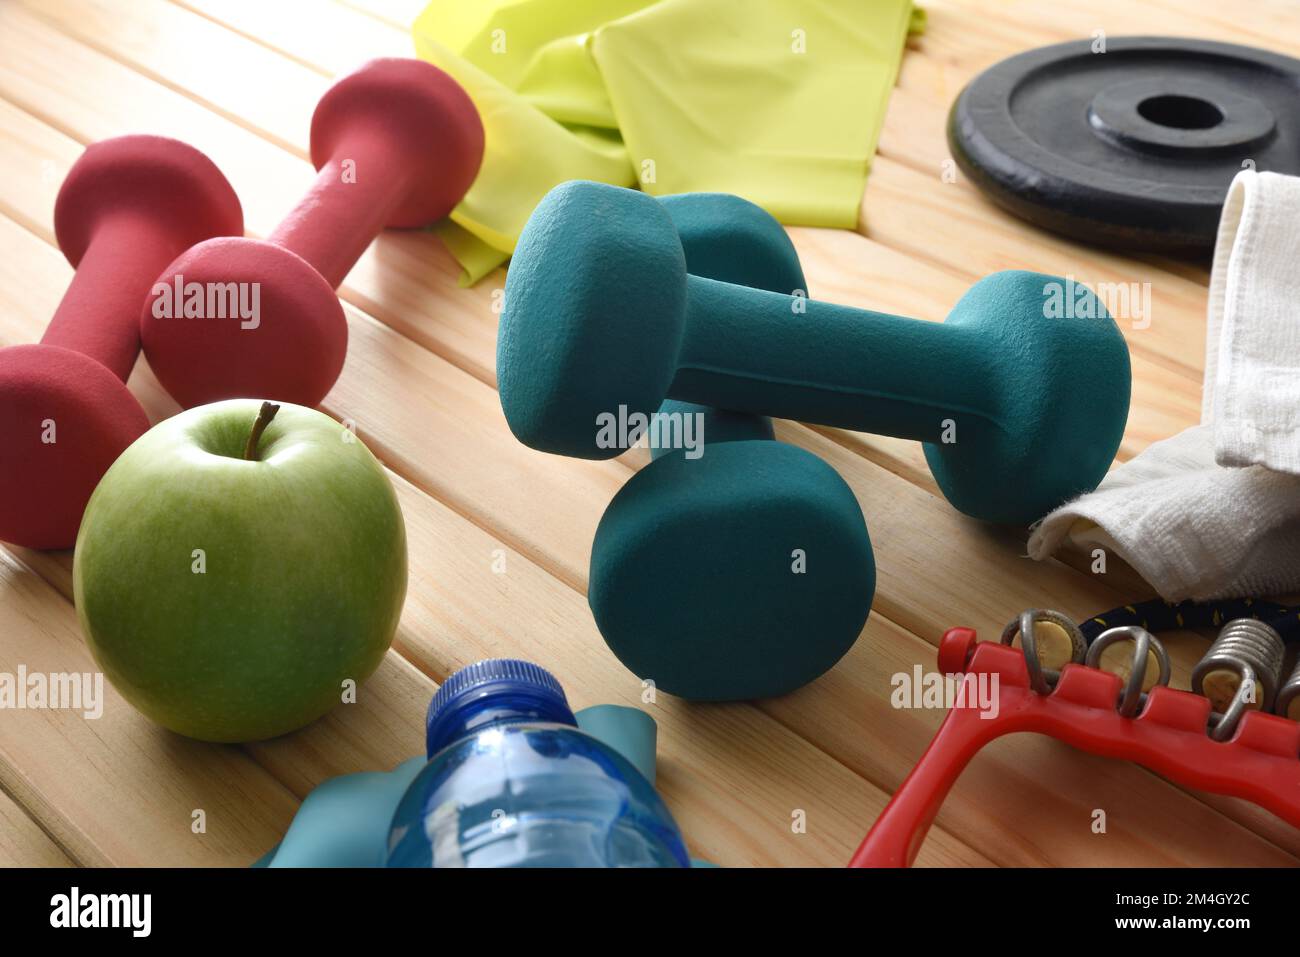 Background of sports equipment and home healthy living on a wooden floor with dumbbells, weights, elastic bands, and healthy eating. Elevated view. Stock Photo